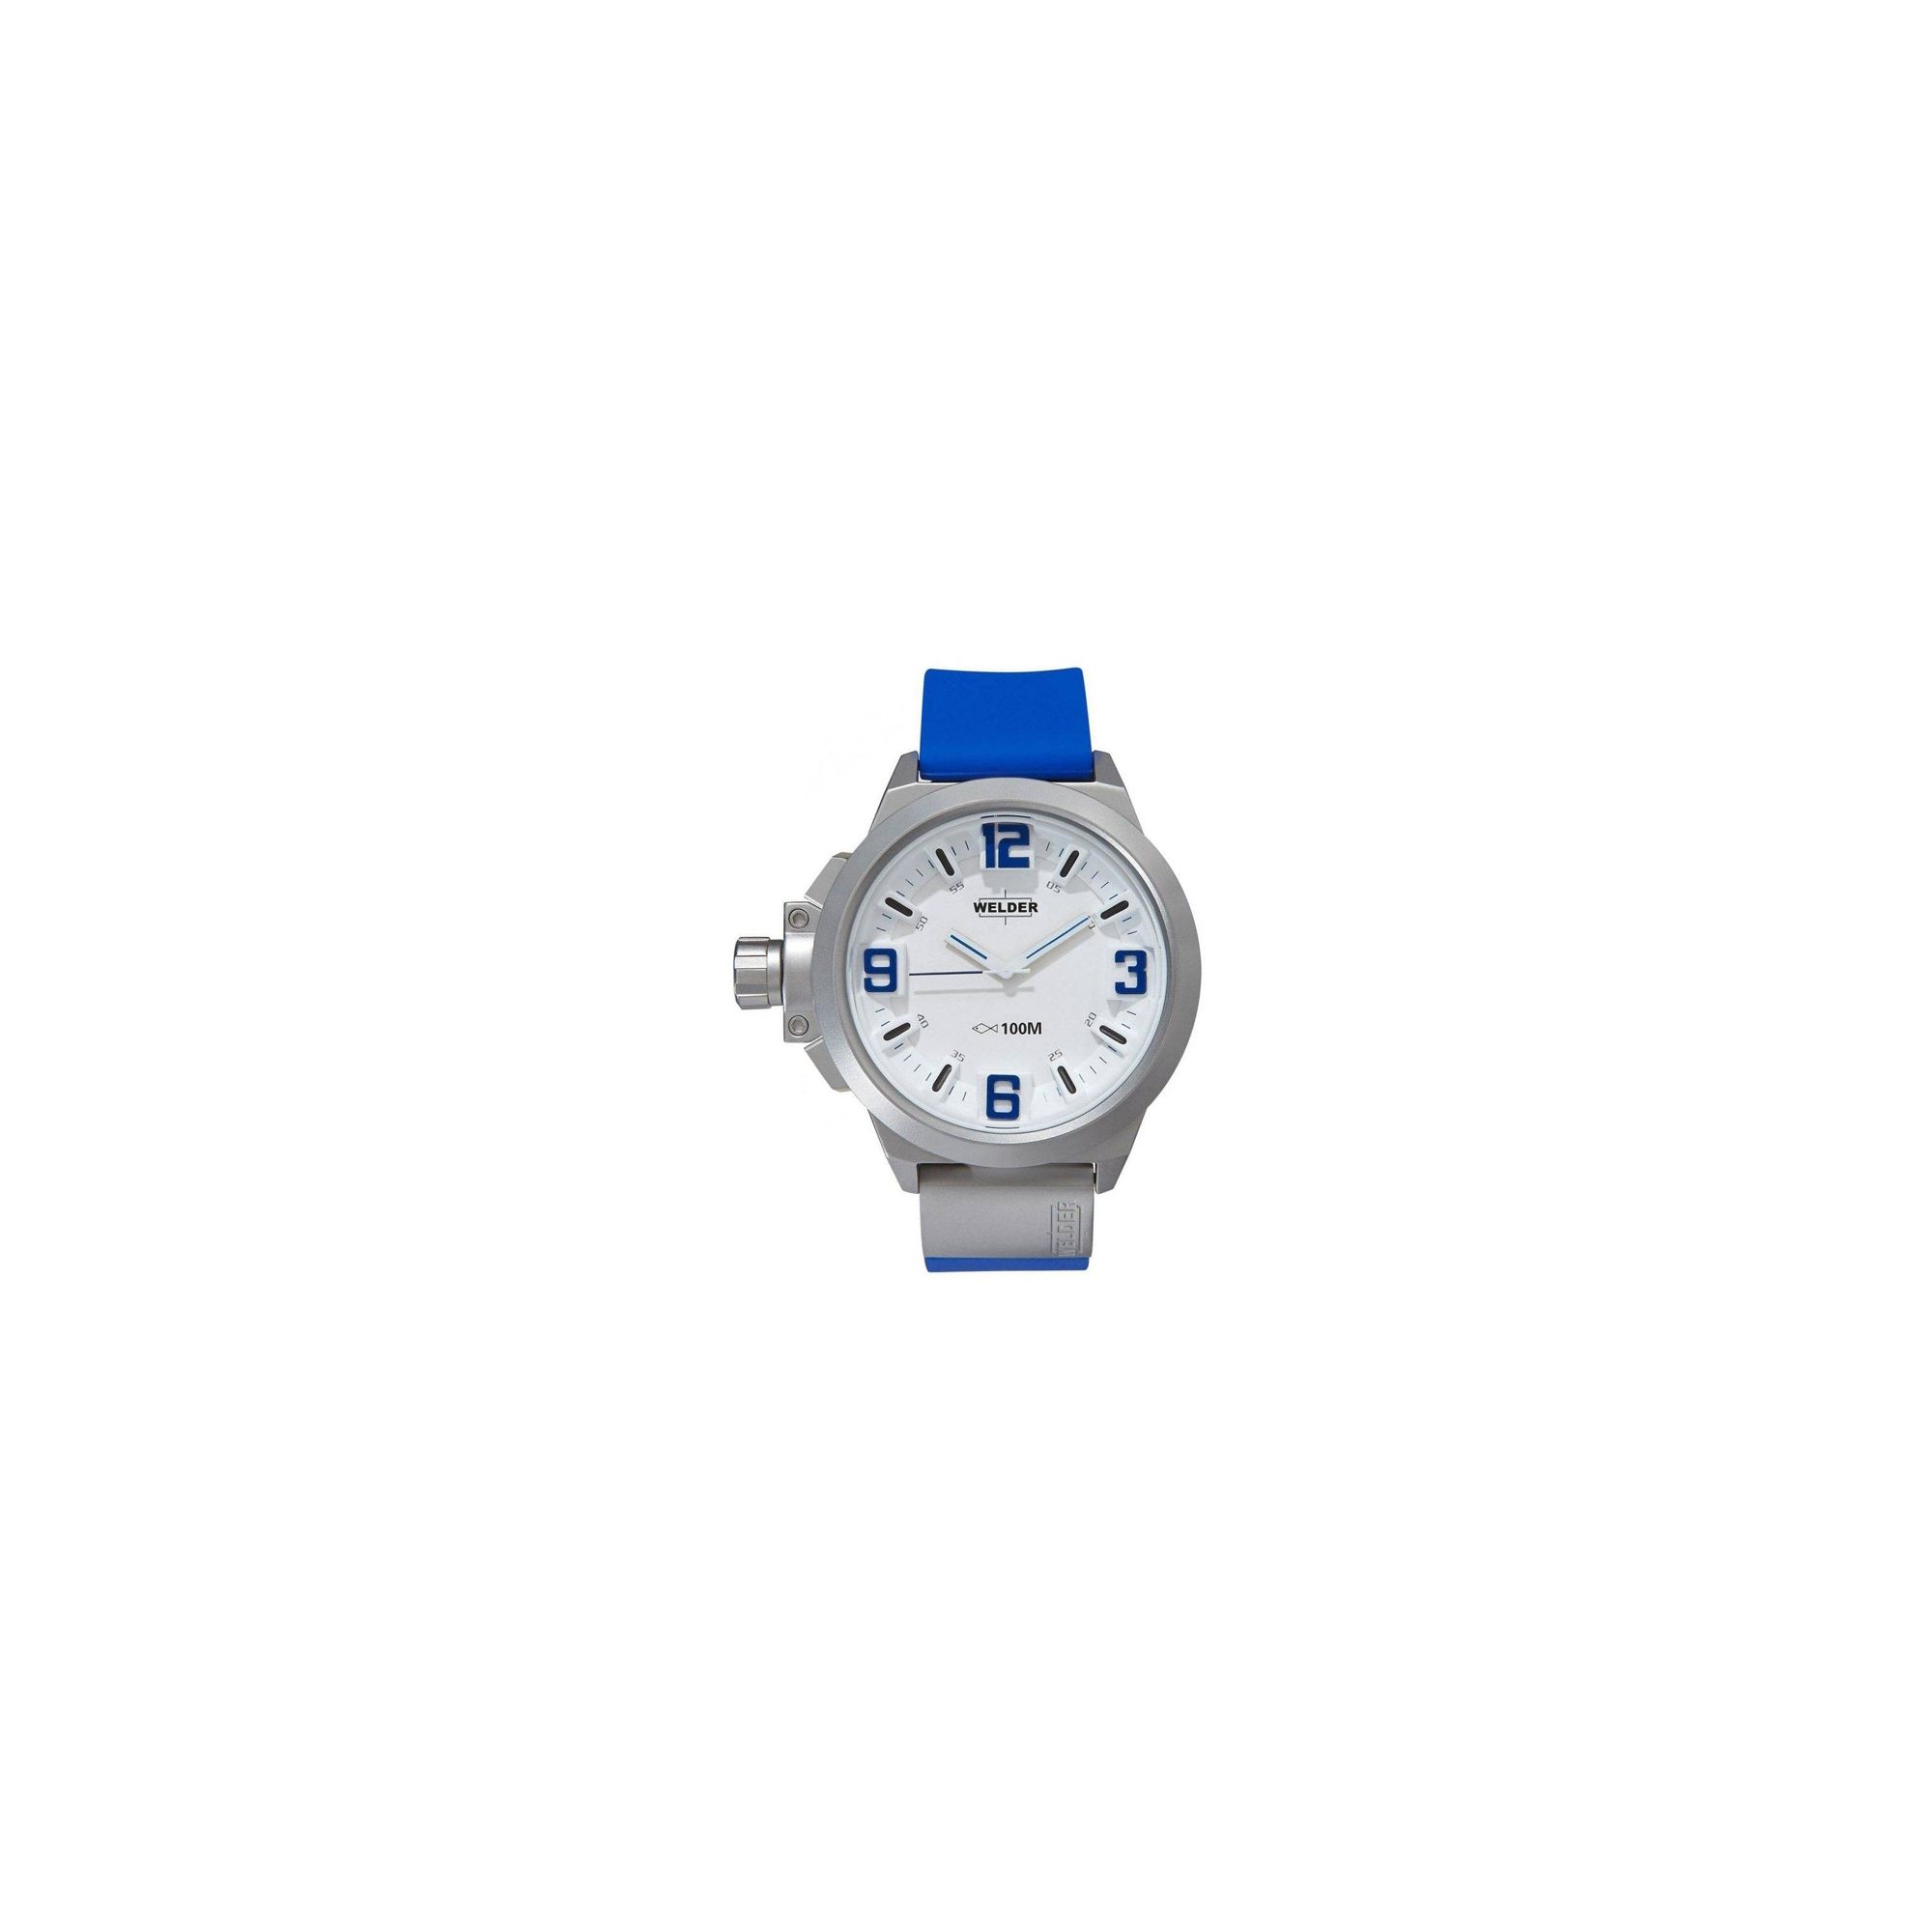 Welder Gents White Dial Blue Rubber Strap Watch K22-904 at Tesco Direct